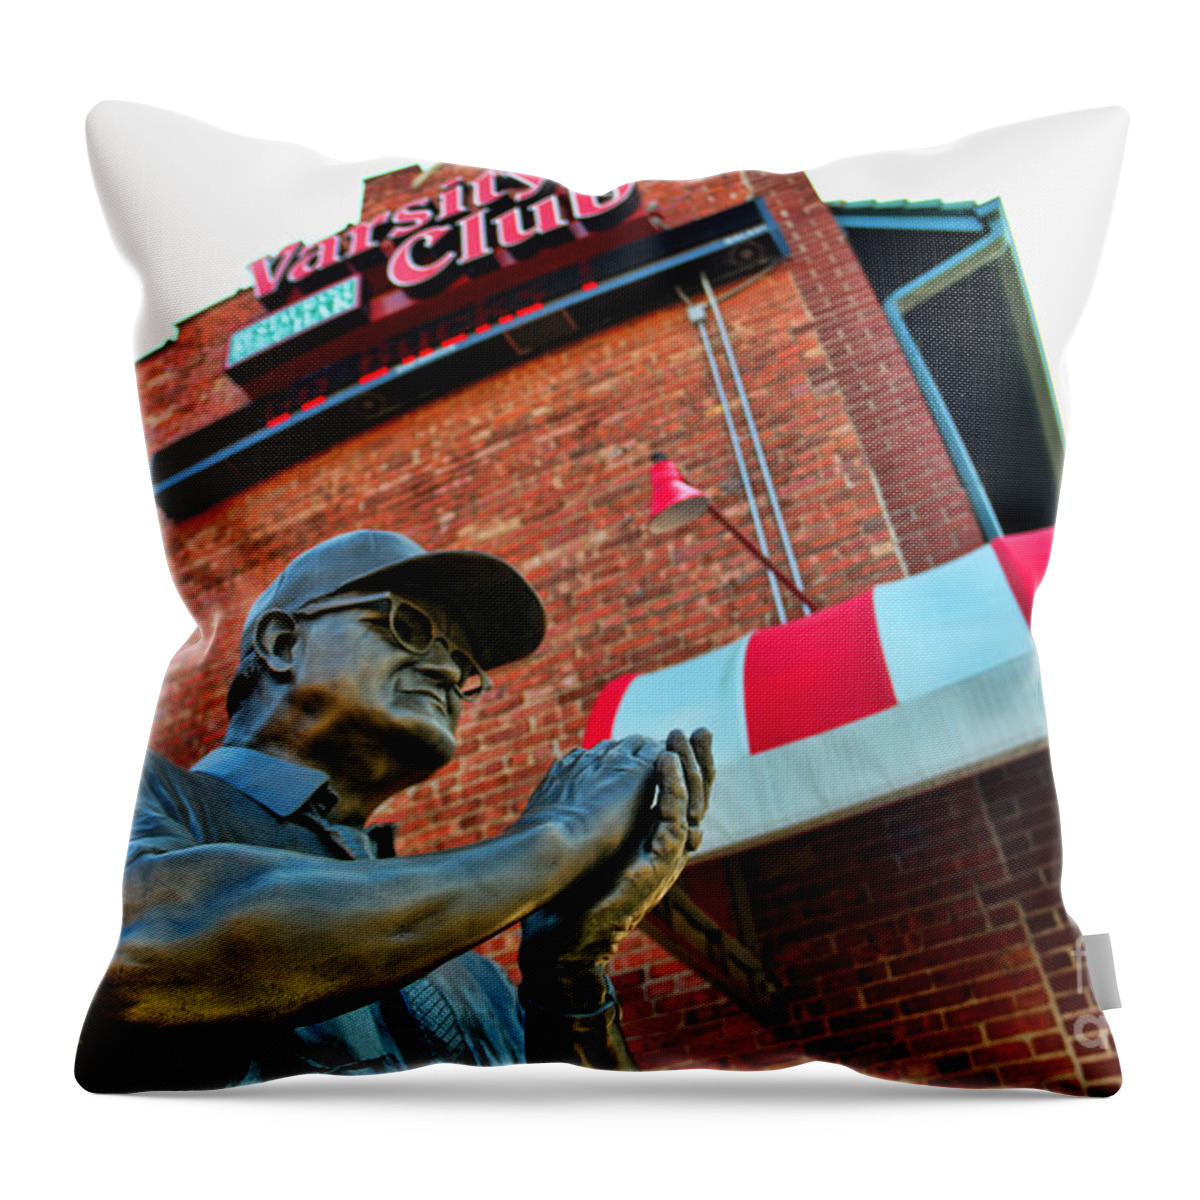 Woody Hayes Statue Throw Pillow featuring the photograph Woody Hayes Statue at the Varsity Club 4831 by Jack Schultz